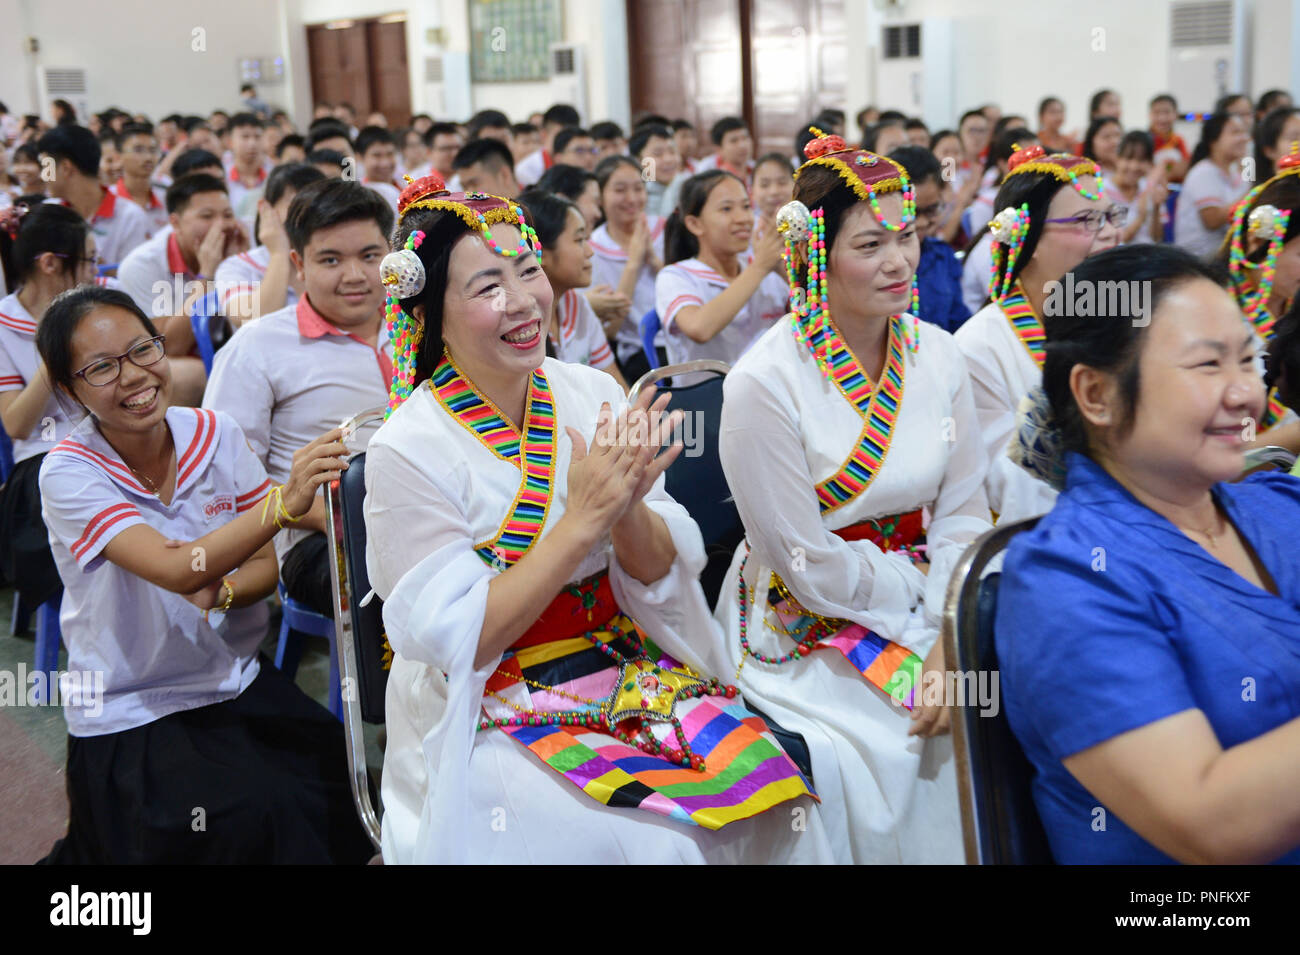 Vientiane, Laos. 20th Sep, 2018. Teachers and students from Lieutou Chinese School watch performances in Vientiane, Laos, on Sept. 20, 2018. 'One Moon, one heart' 2018 Chinese mid-autumn international friendship activities were held in Vientiane on Thursday. Credit: Liu Ailun/Xinhua/Alamy Live News Stock Photo